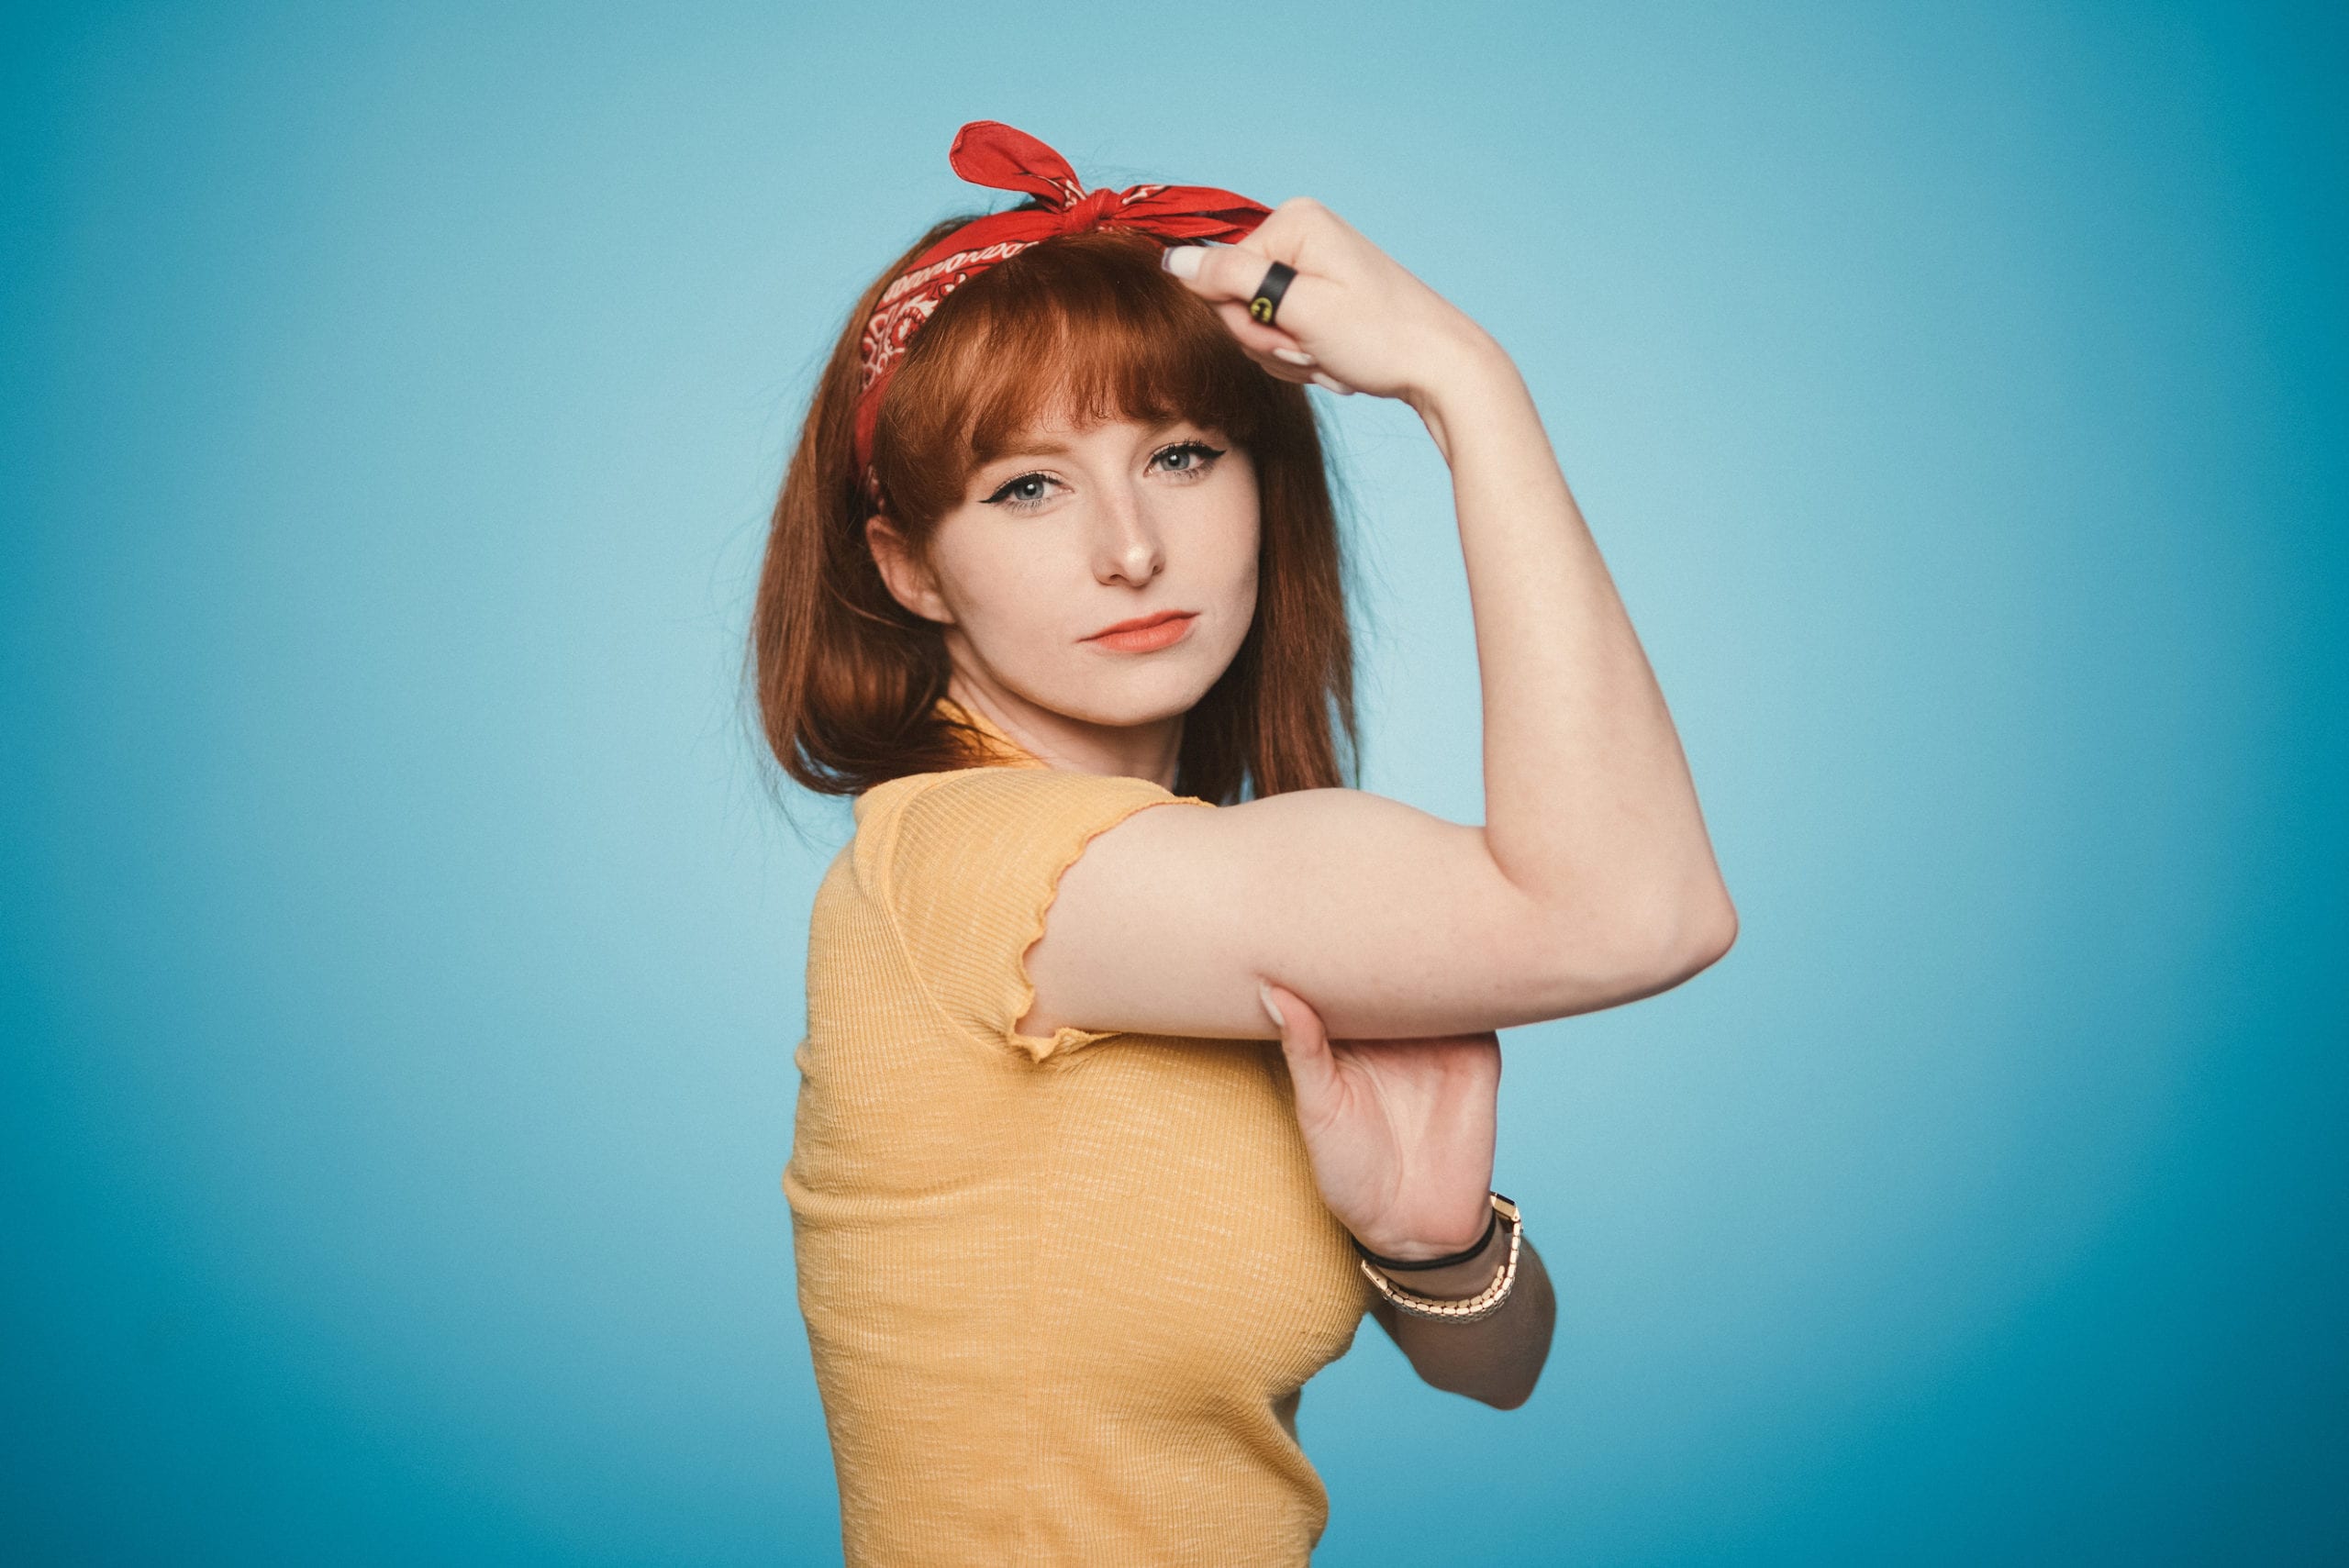 Heart Piece Media Day Woman with short hazel hair with a red ribbon in it doing a Rosie the Riveter pose for the camera with a light blue background